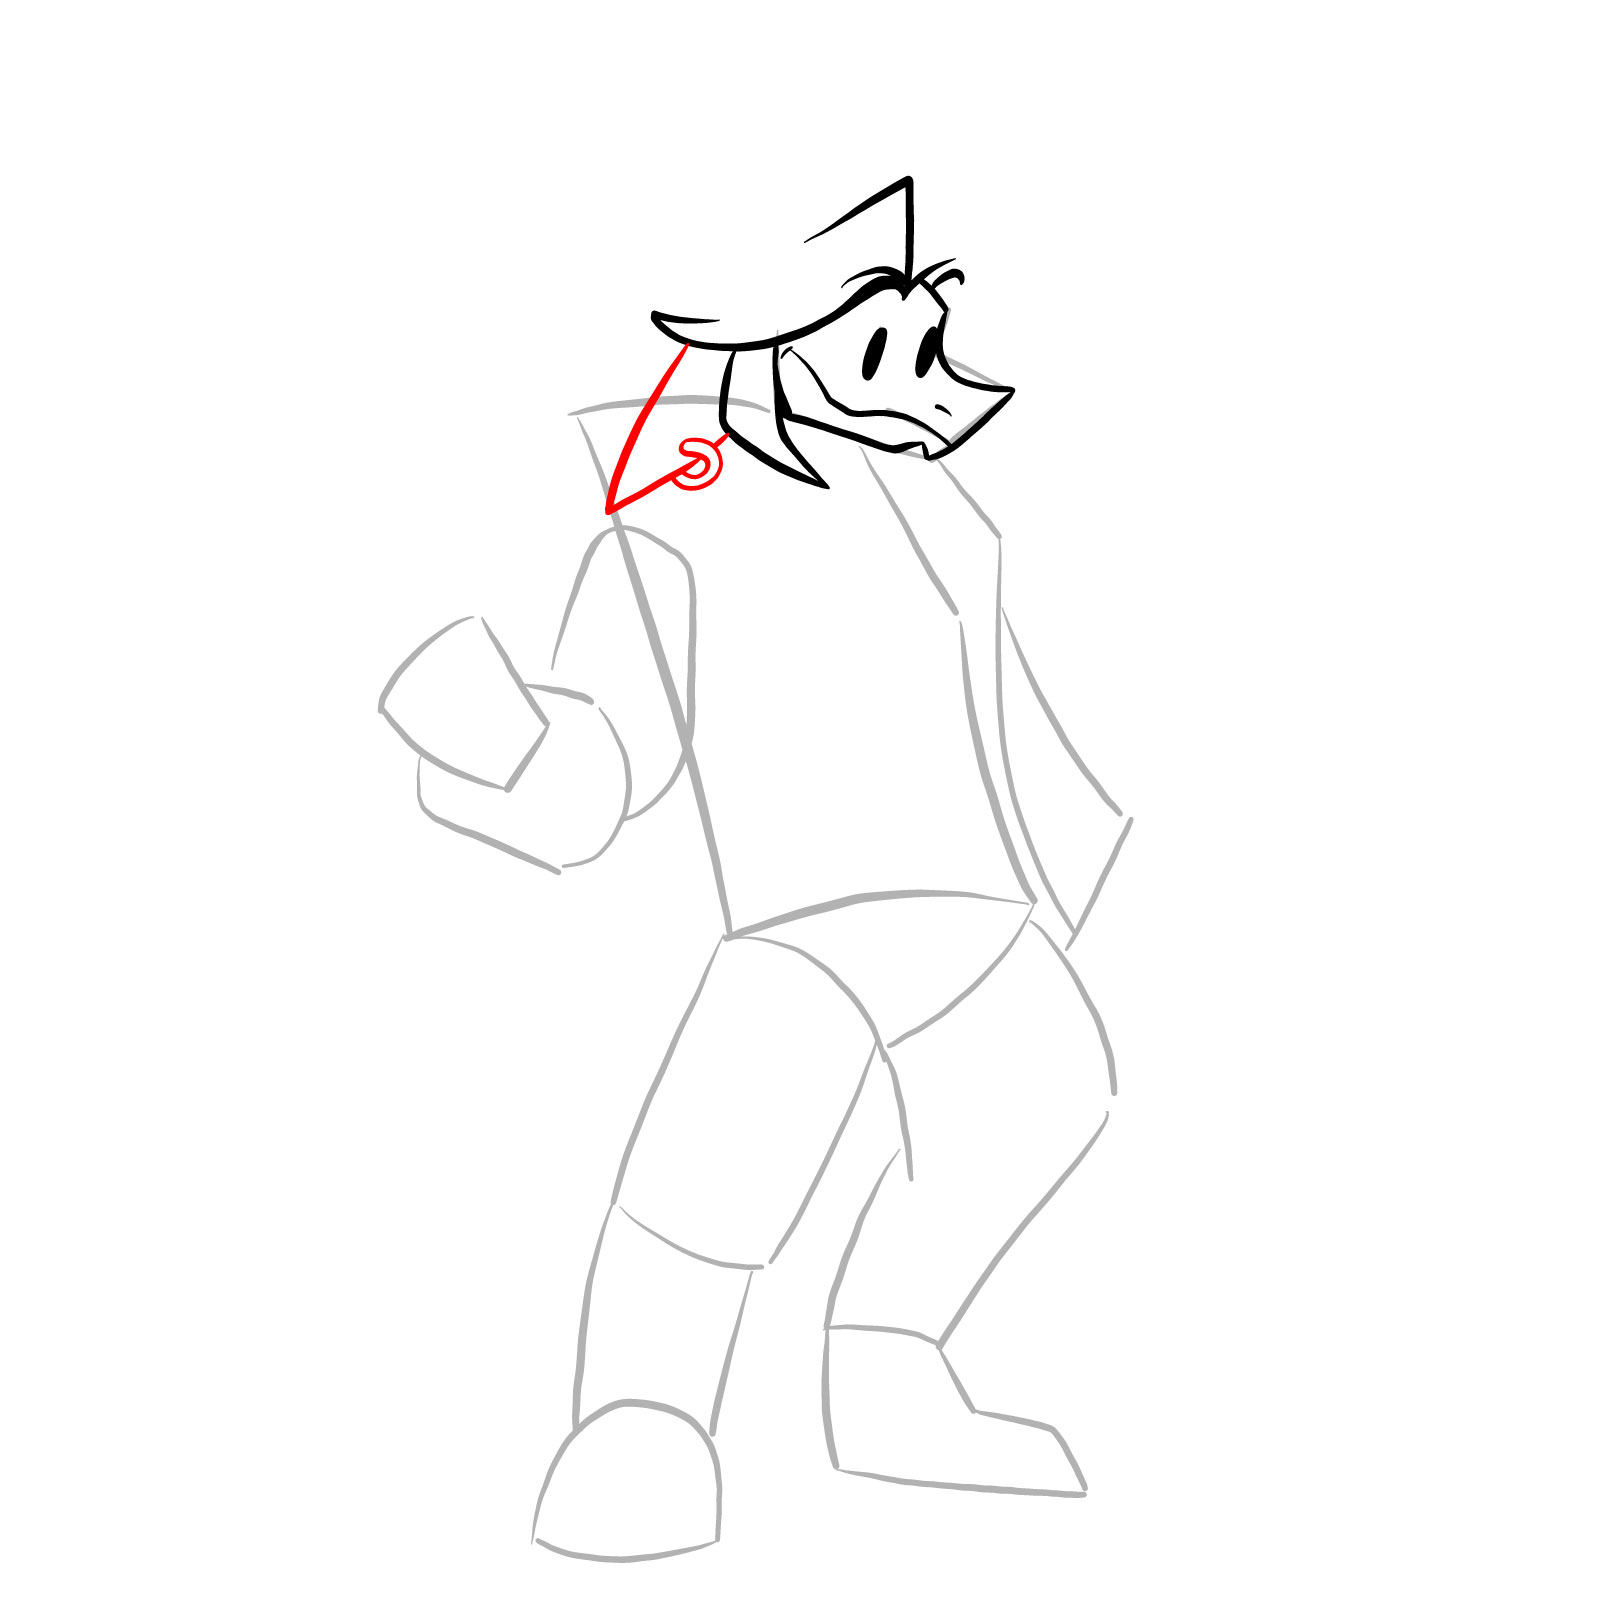 How to draw Ace from FNF - step 11